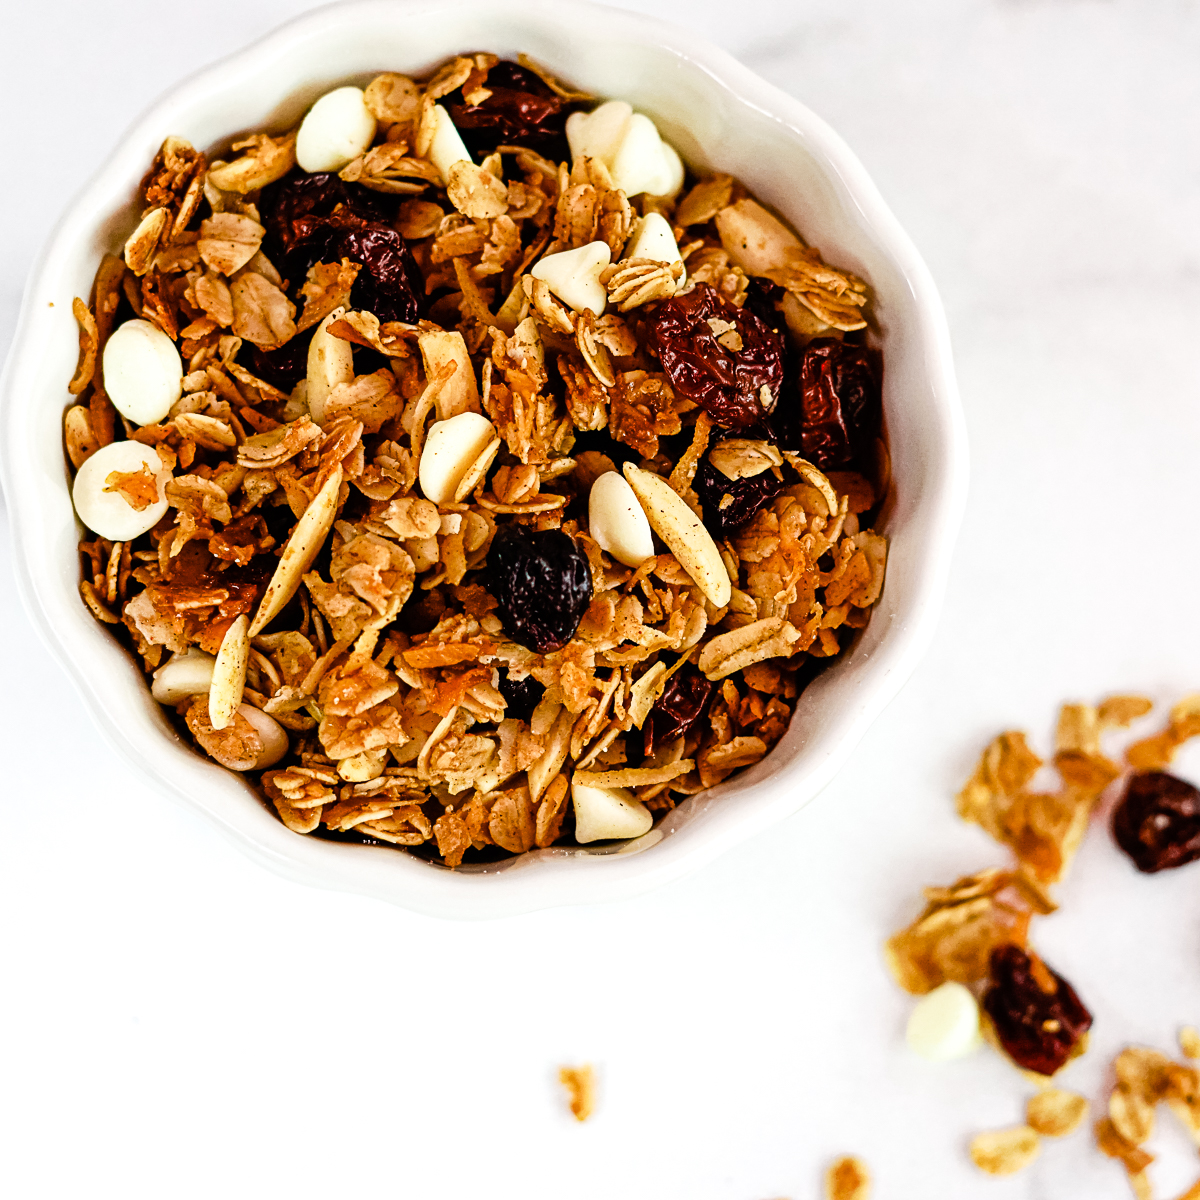 Overhead shot of gingerbread granola in a white bowl on a white countertop. You can see oats, slivered almonds, spices, white chocolate chips and craisins.